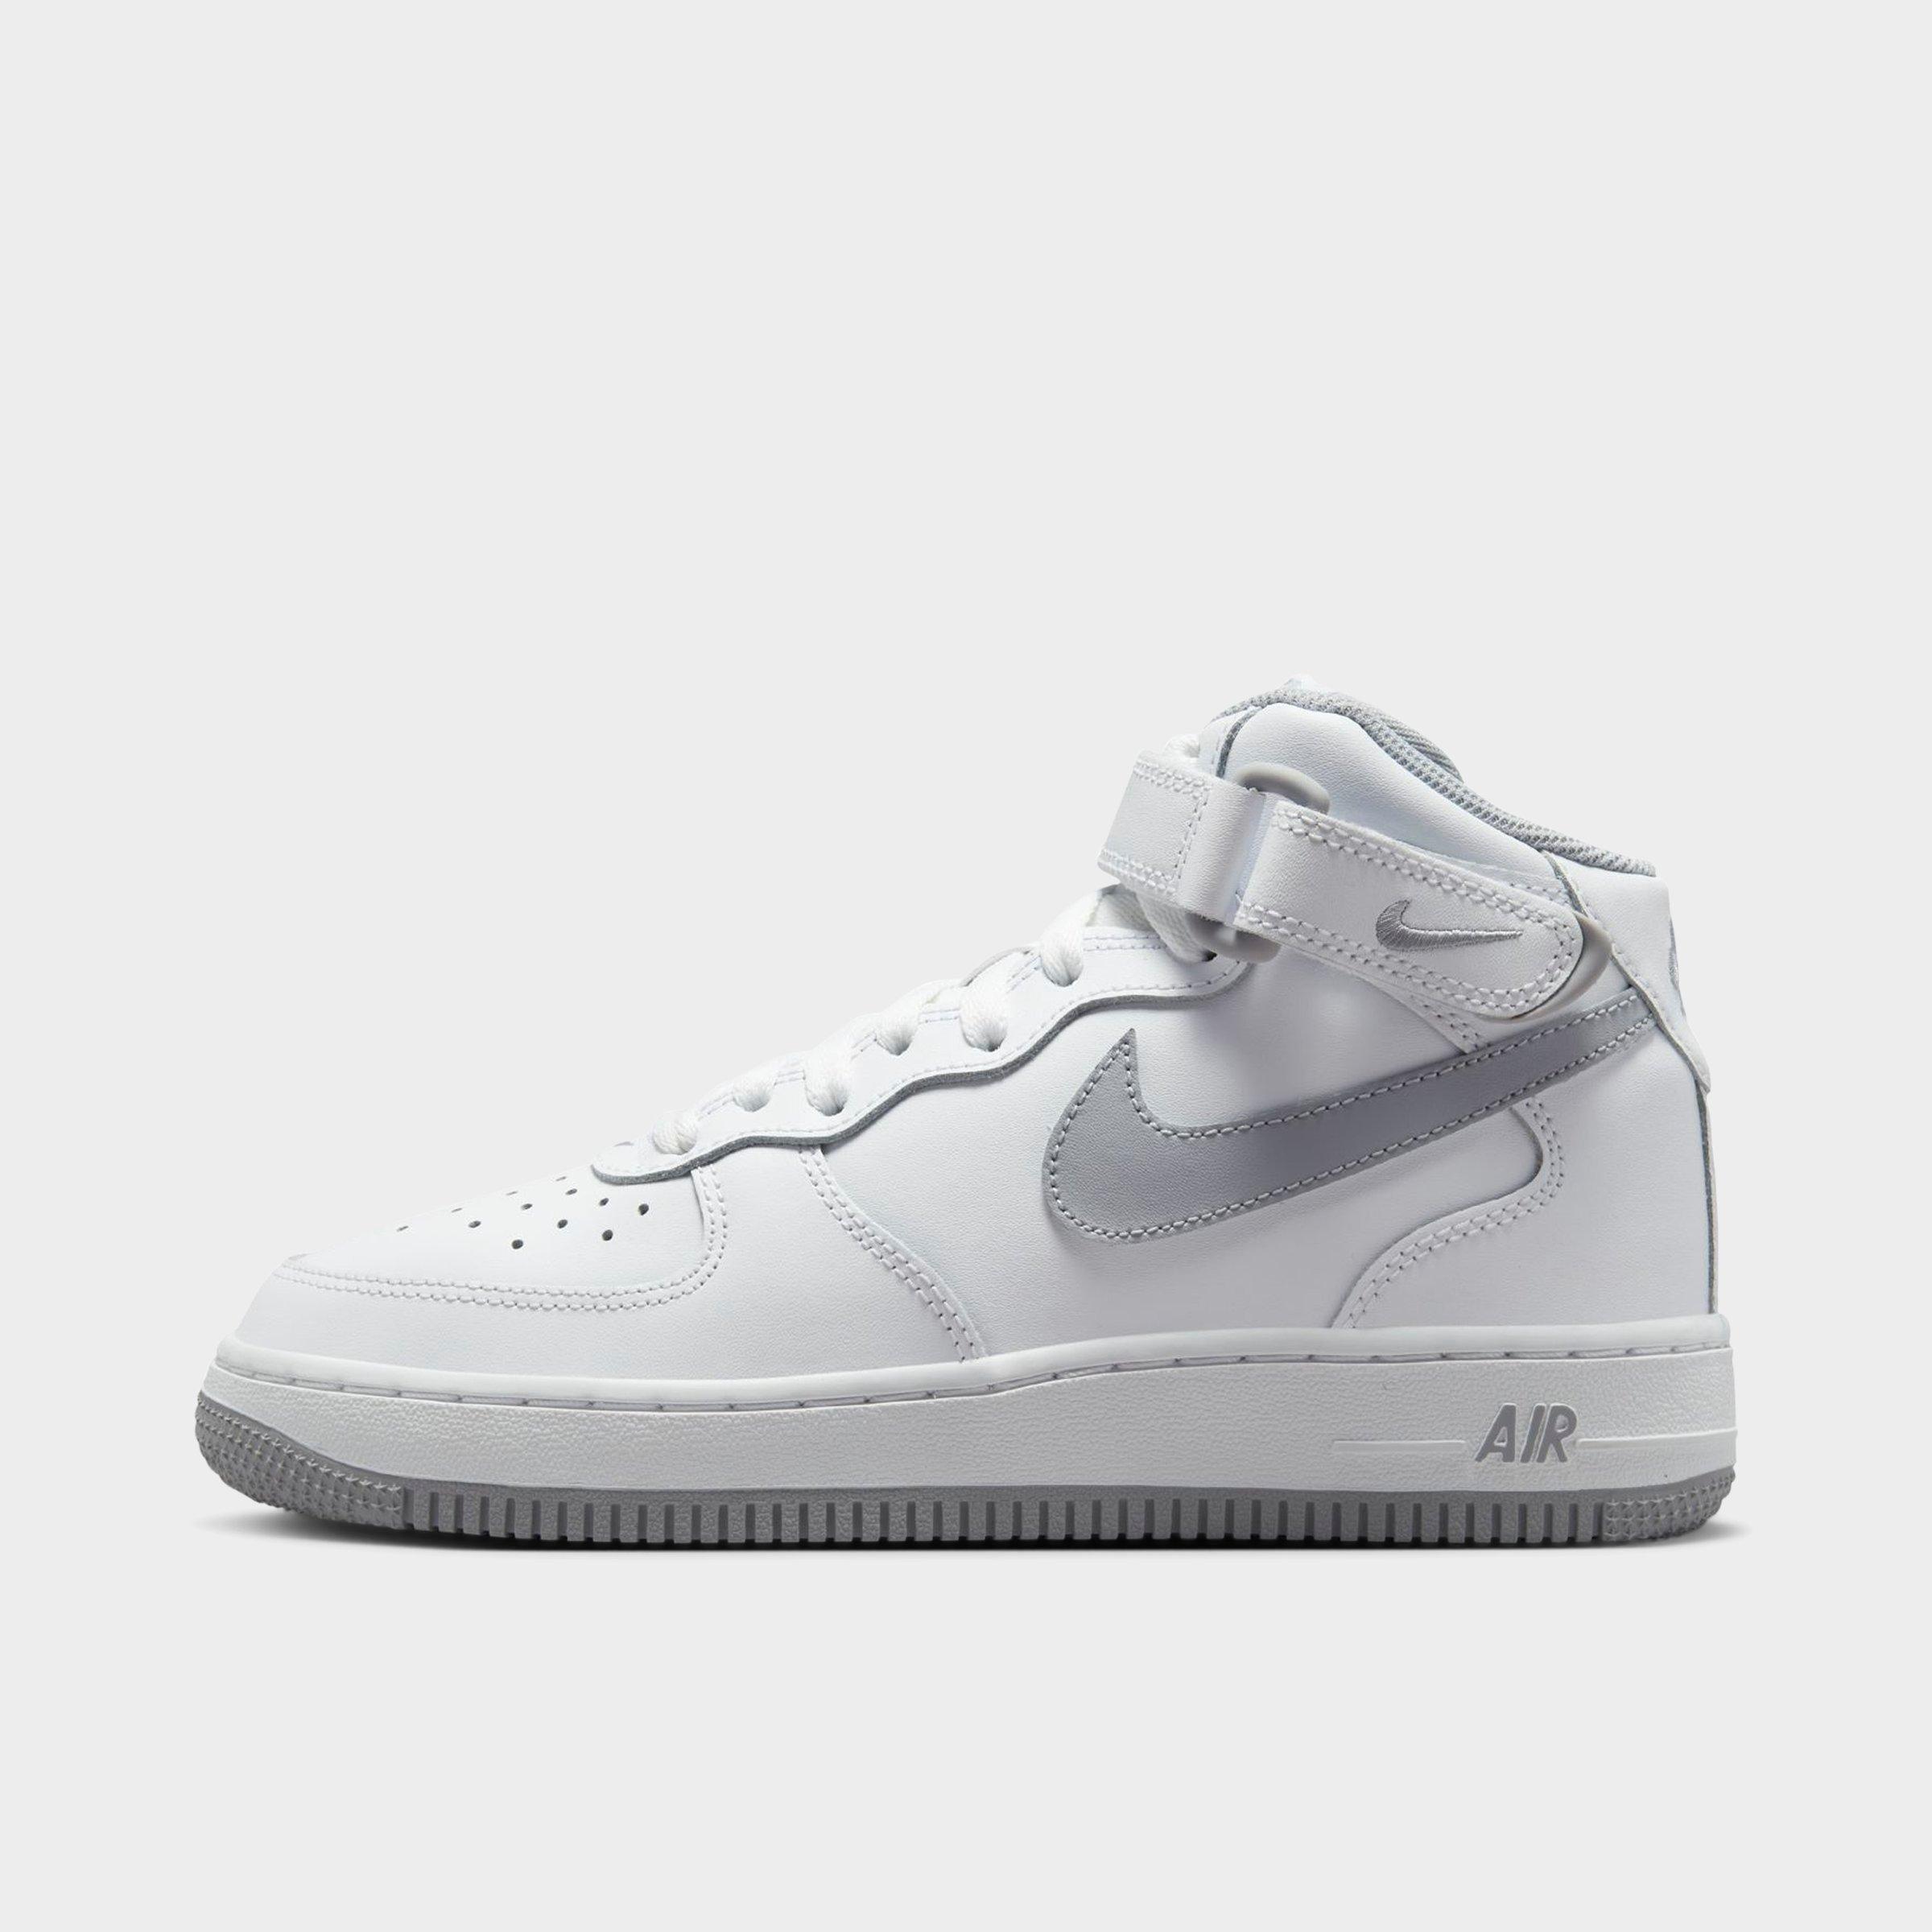 NIKE NIKE BIG KIDS' AIR FORCE 1 MID '07 LE CASUAL SHOES